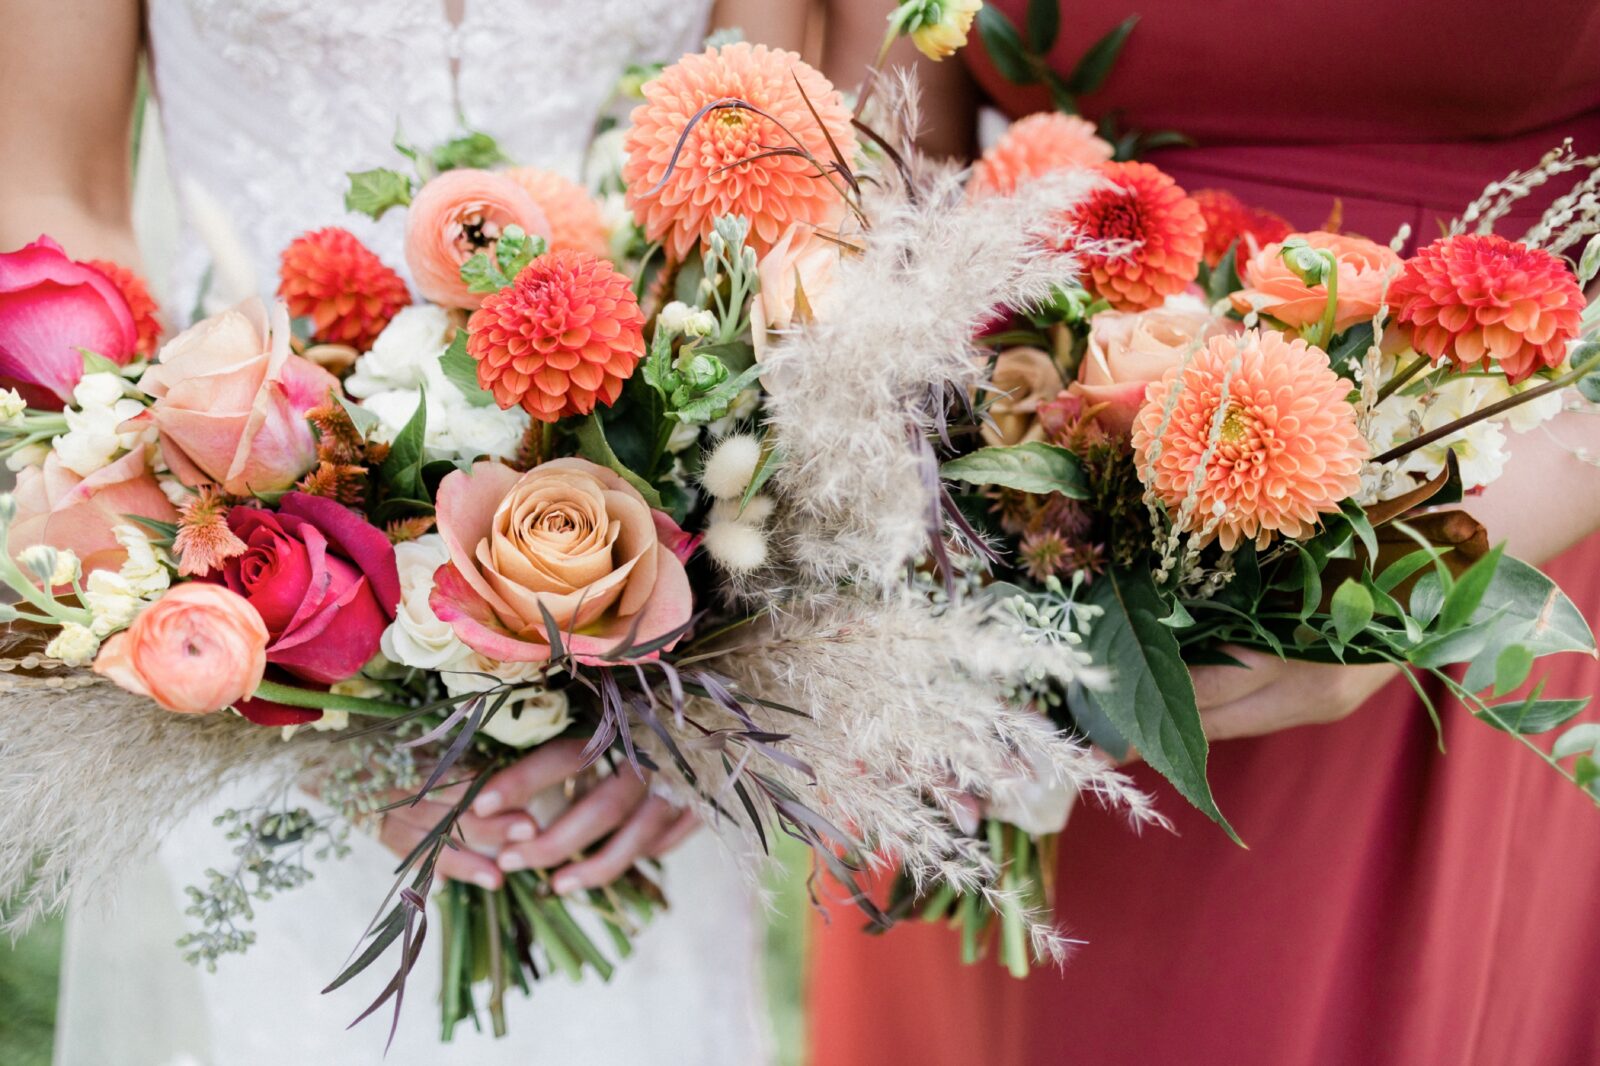 Detail of bride and bridesmaids bouquets with shades of coral